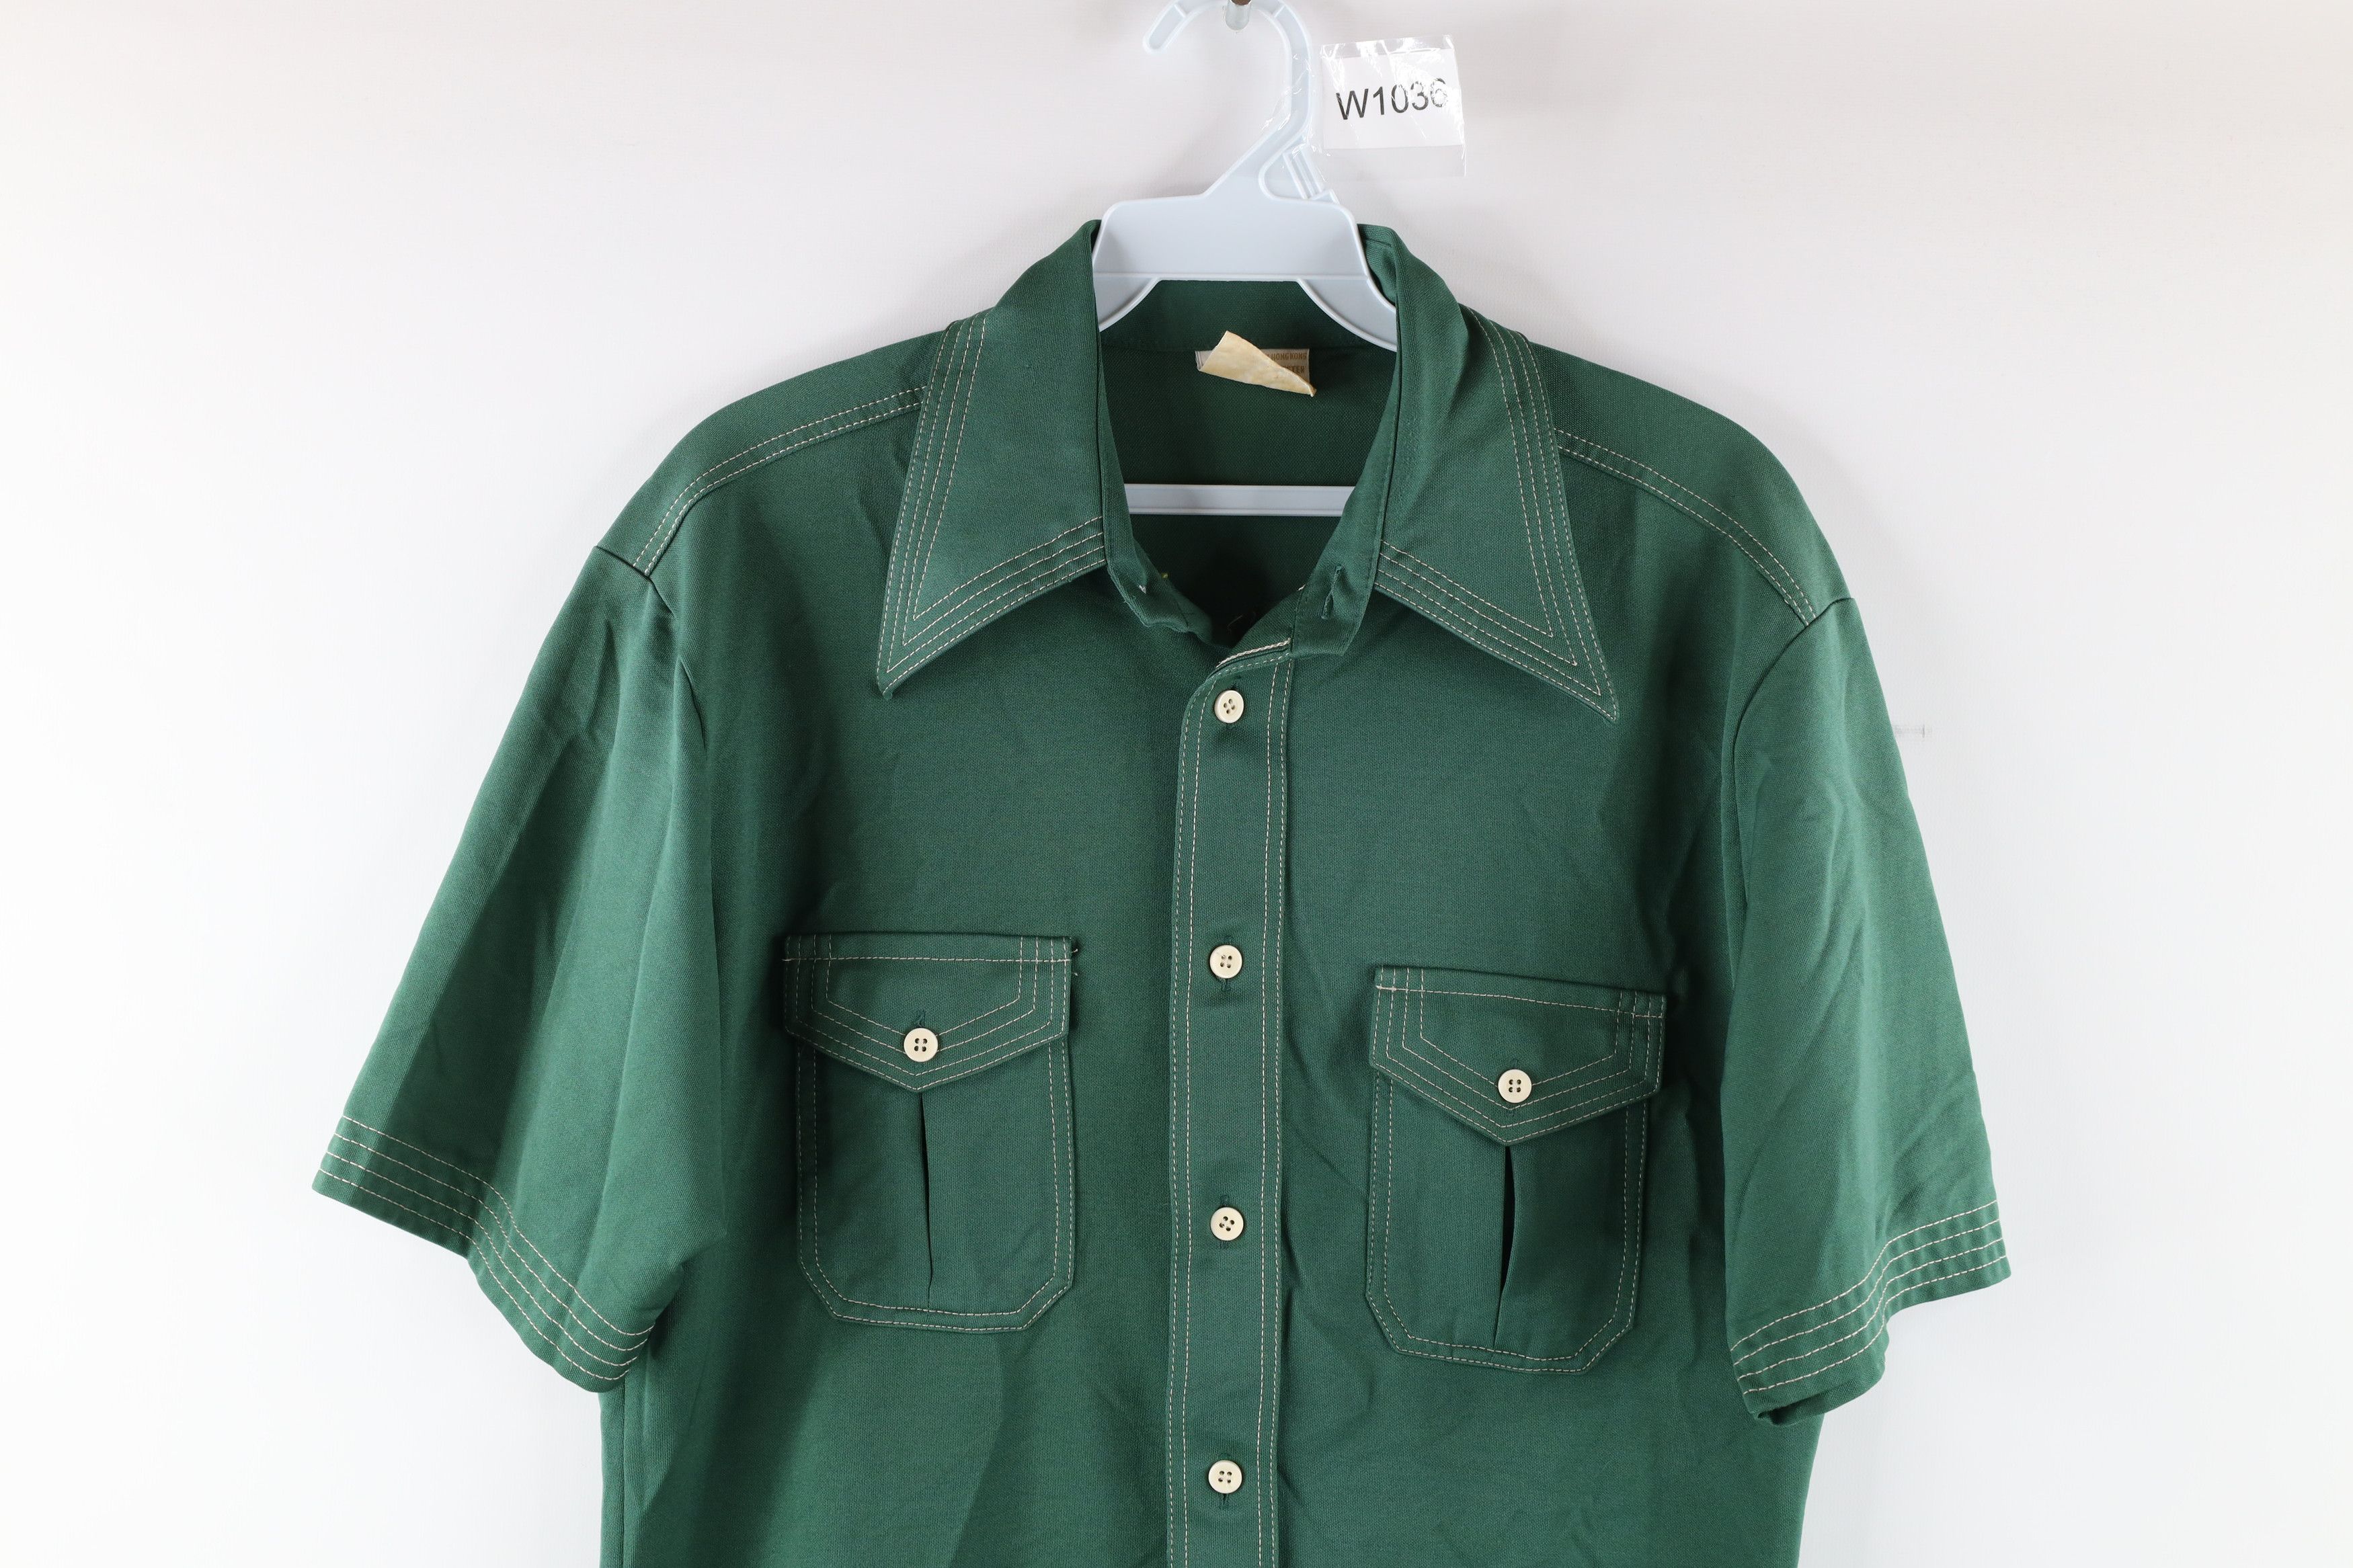 Vintage Vintage 60s Rockabilly Knit Collared Button Shirt Green Size US M / EU 48-50 / 2 - 2 Preview